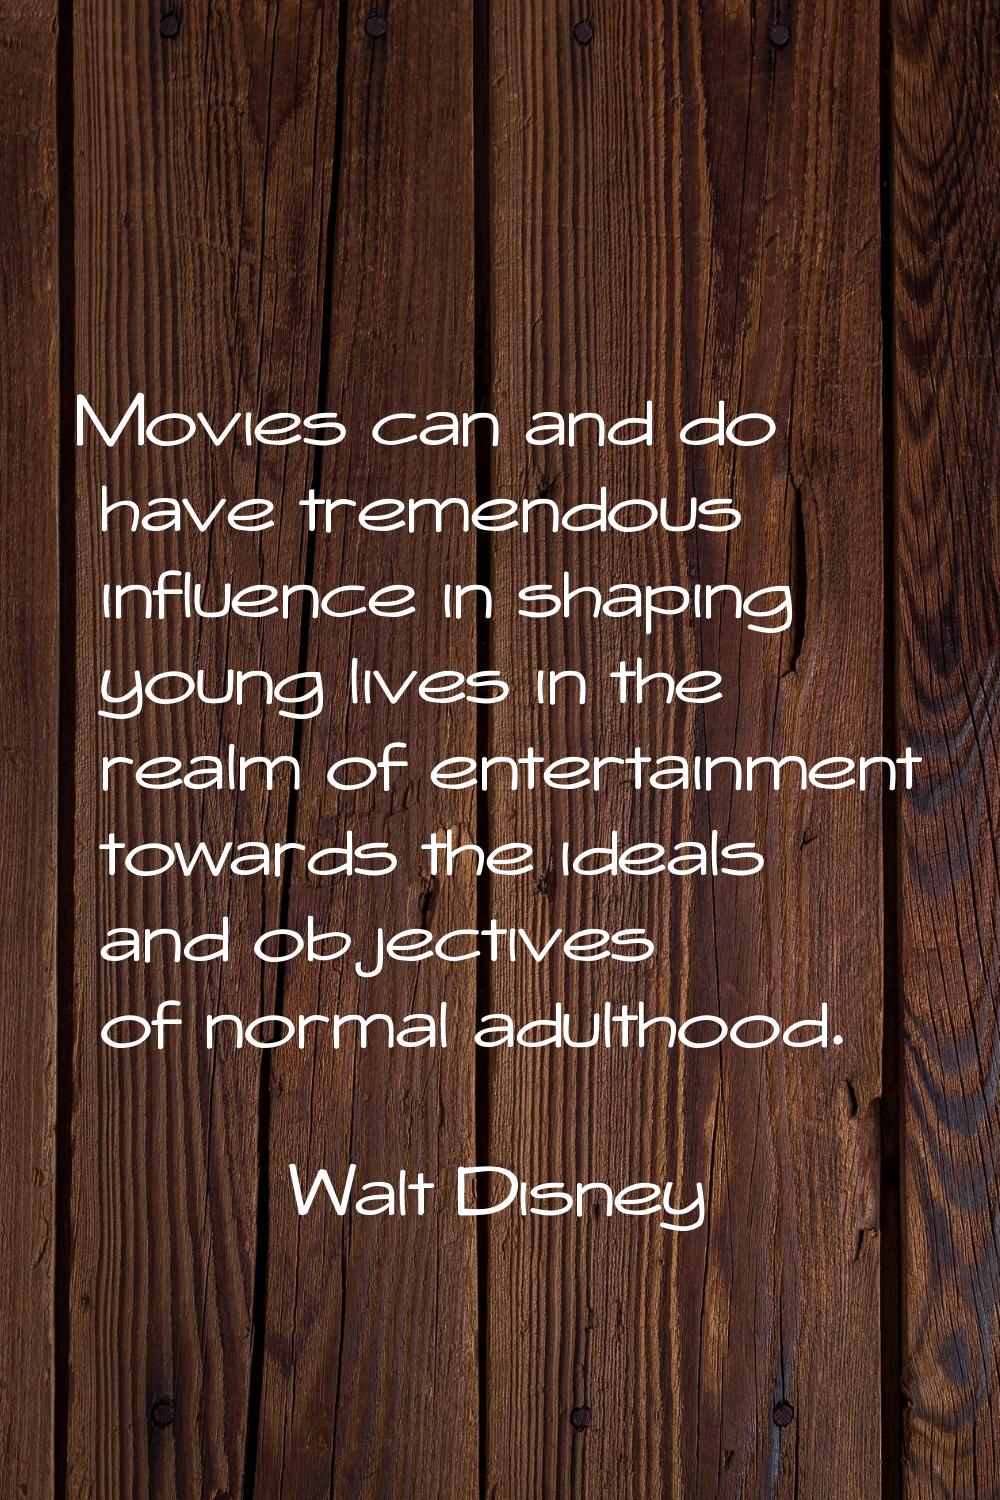 Movies can and do have tremendous influence in shaping young lives in the realm of entertainment to